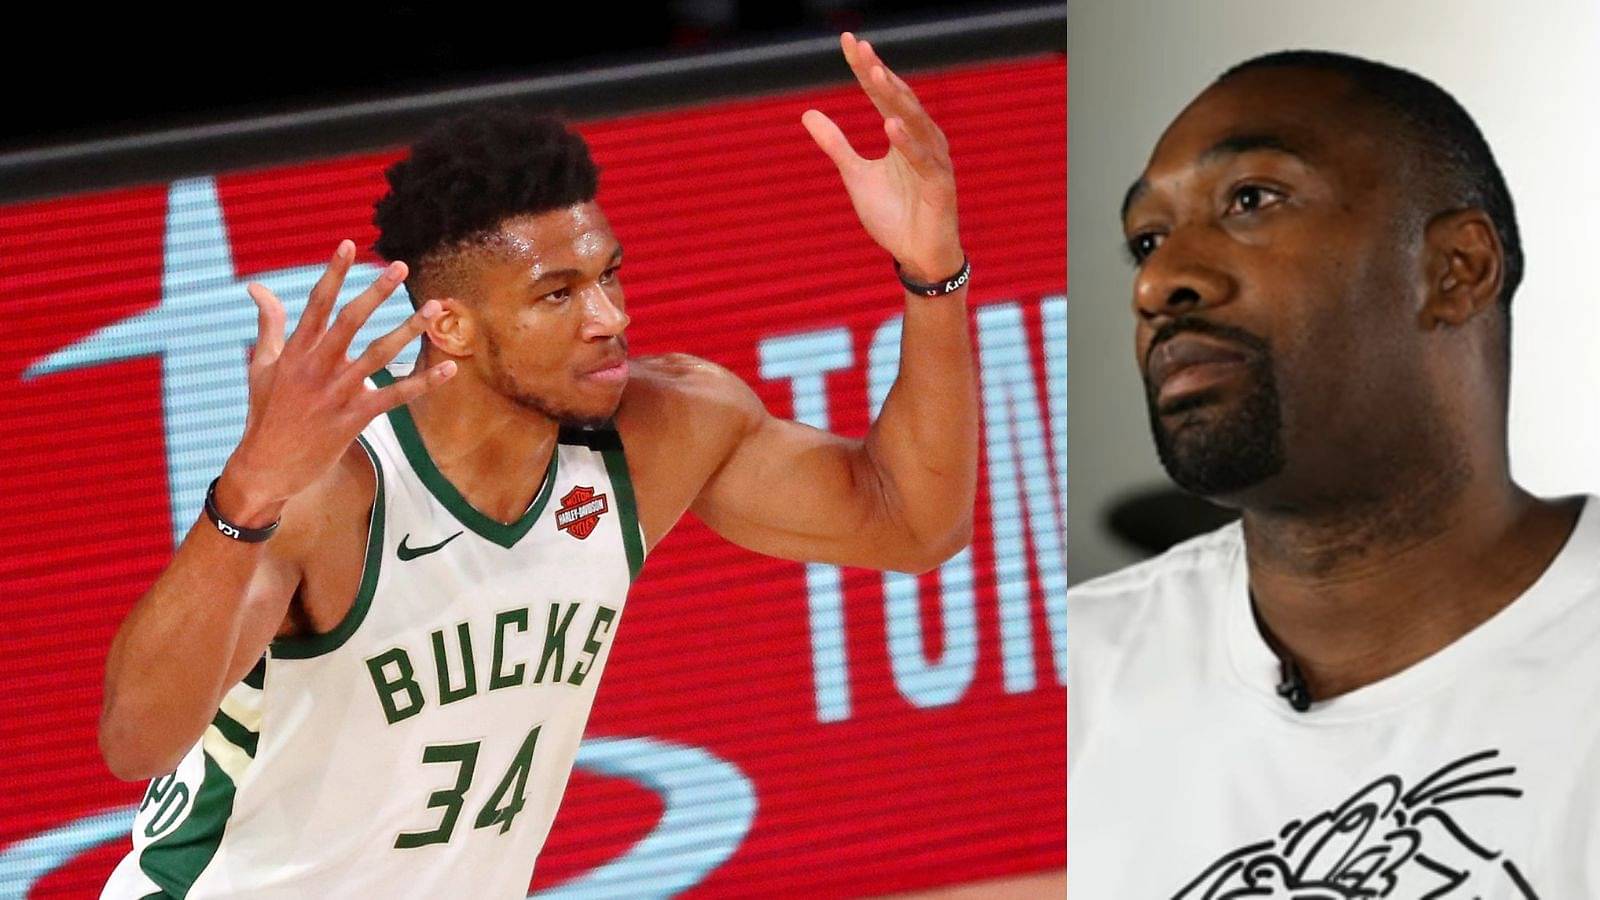 "Giannis Antetokounmpo doesn’t understand basketball": Gilbert Arenas says something outrageous in a conversation with Lakers' assistant coach